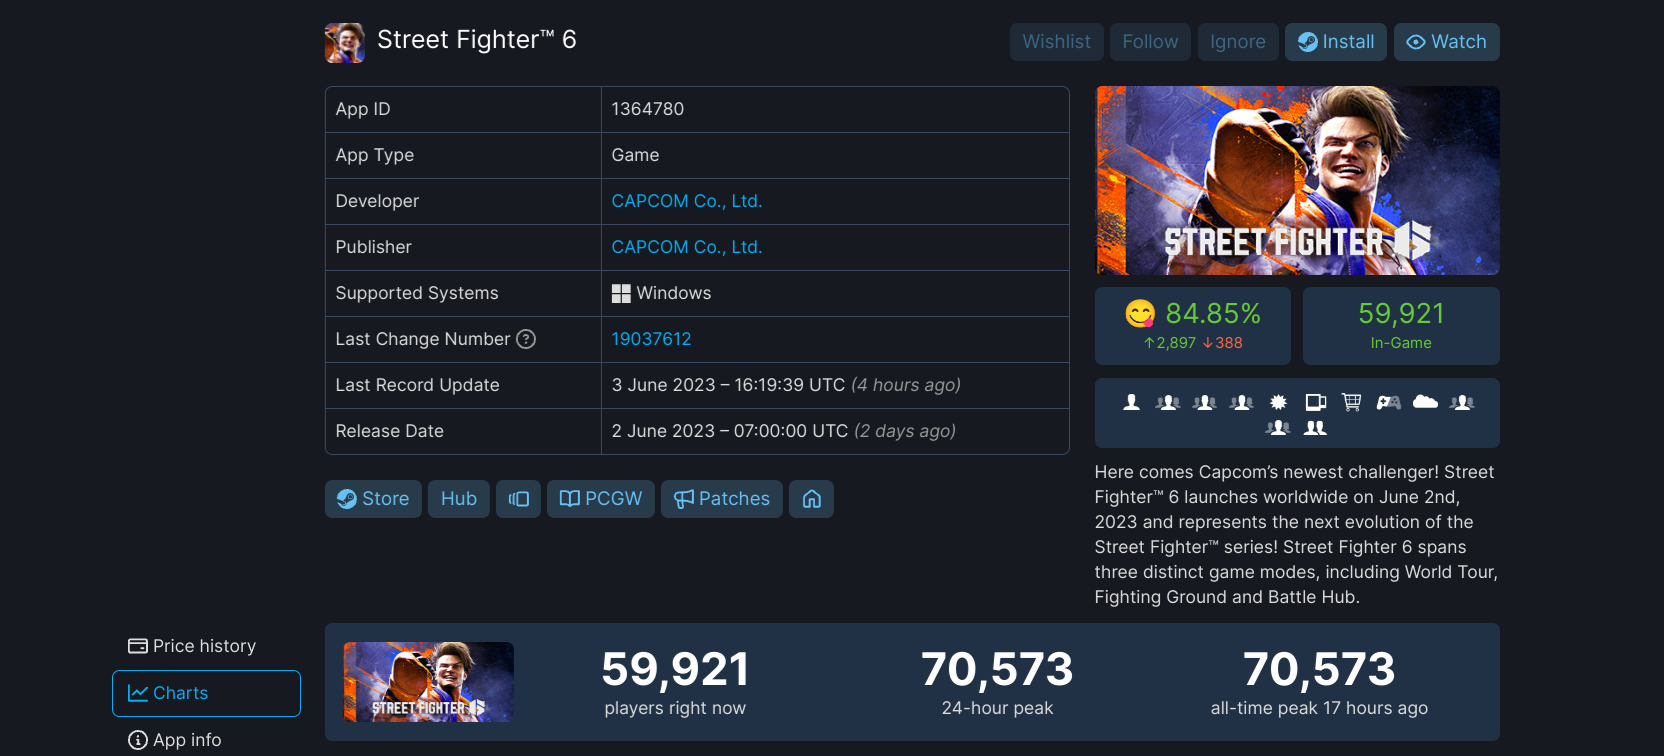 All-Time Peak Player Count of Street Fighter 6 at the Time of Writing